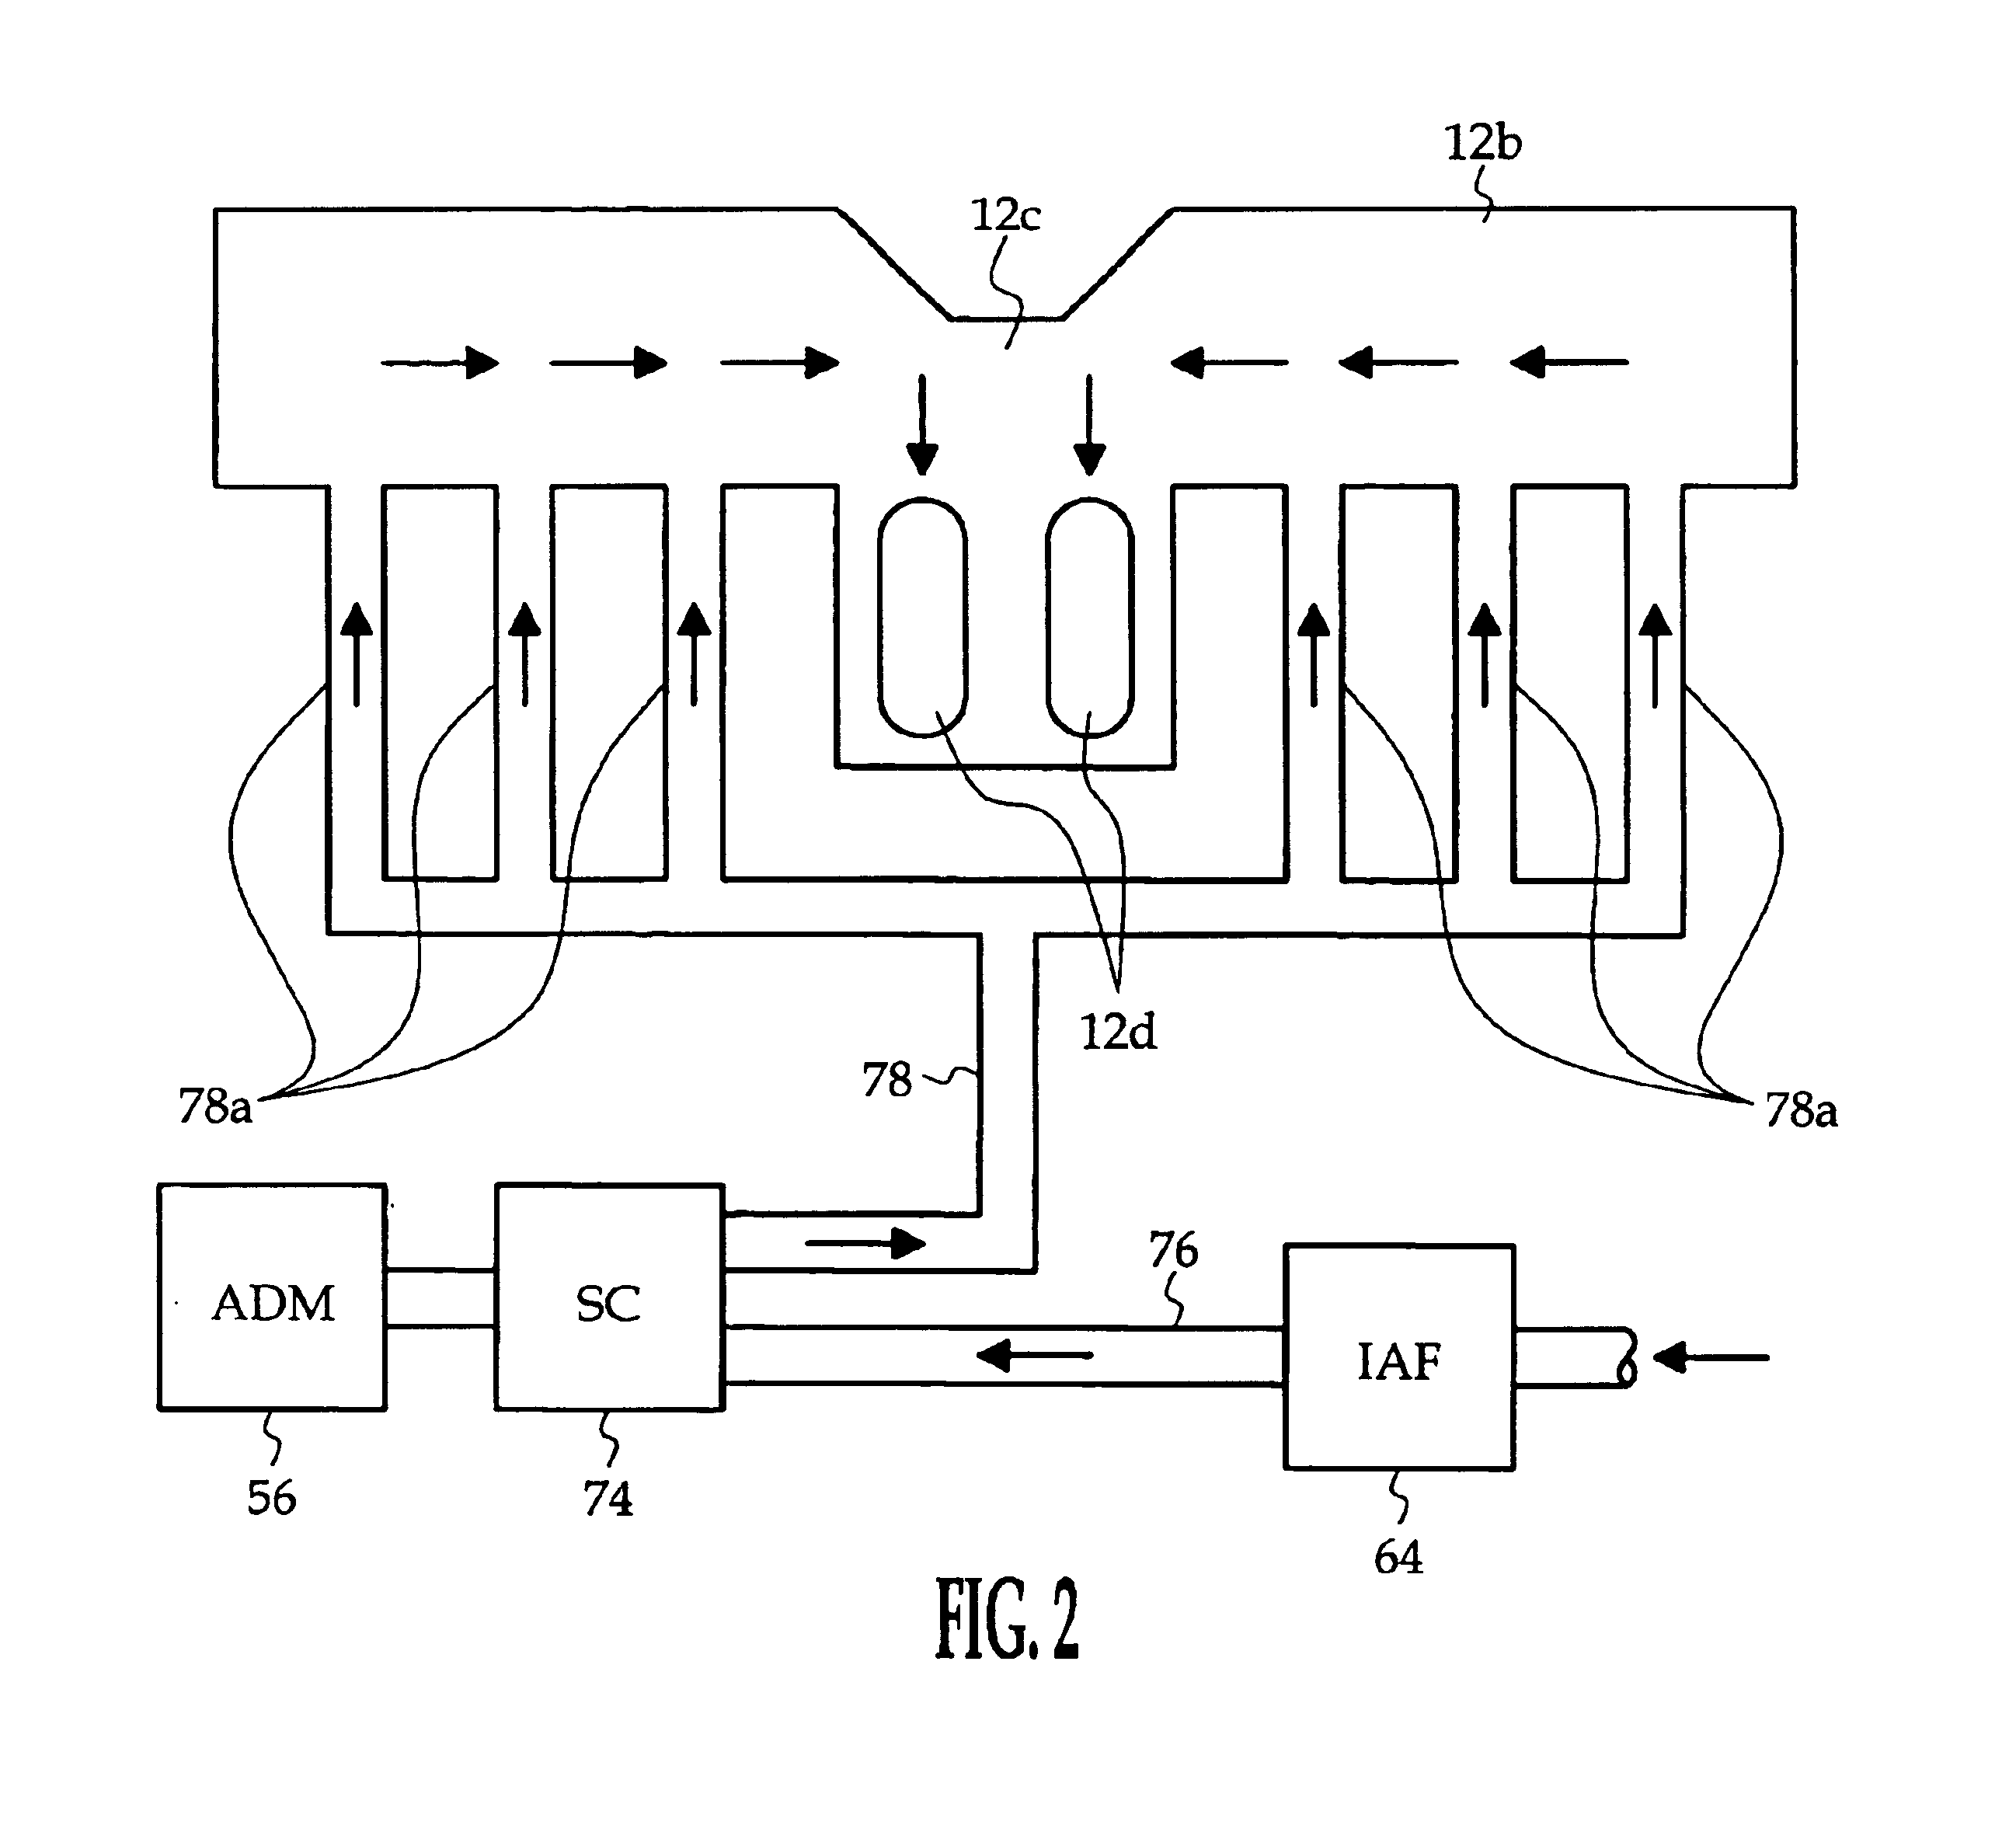 Air injection apparatus for a turbocharged diesel engine